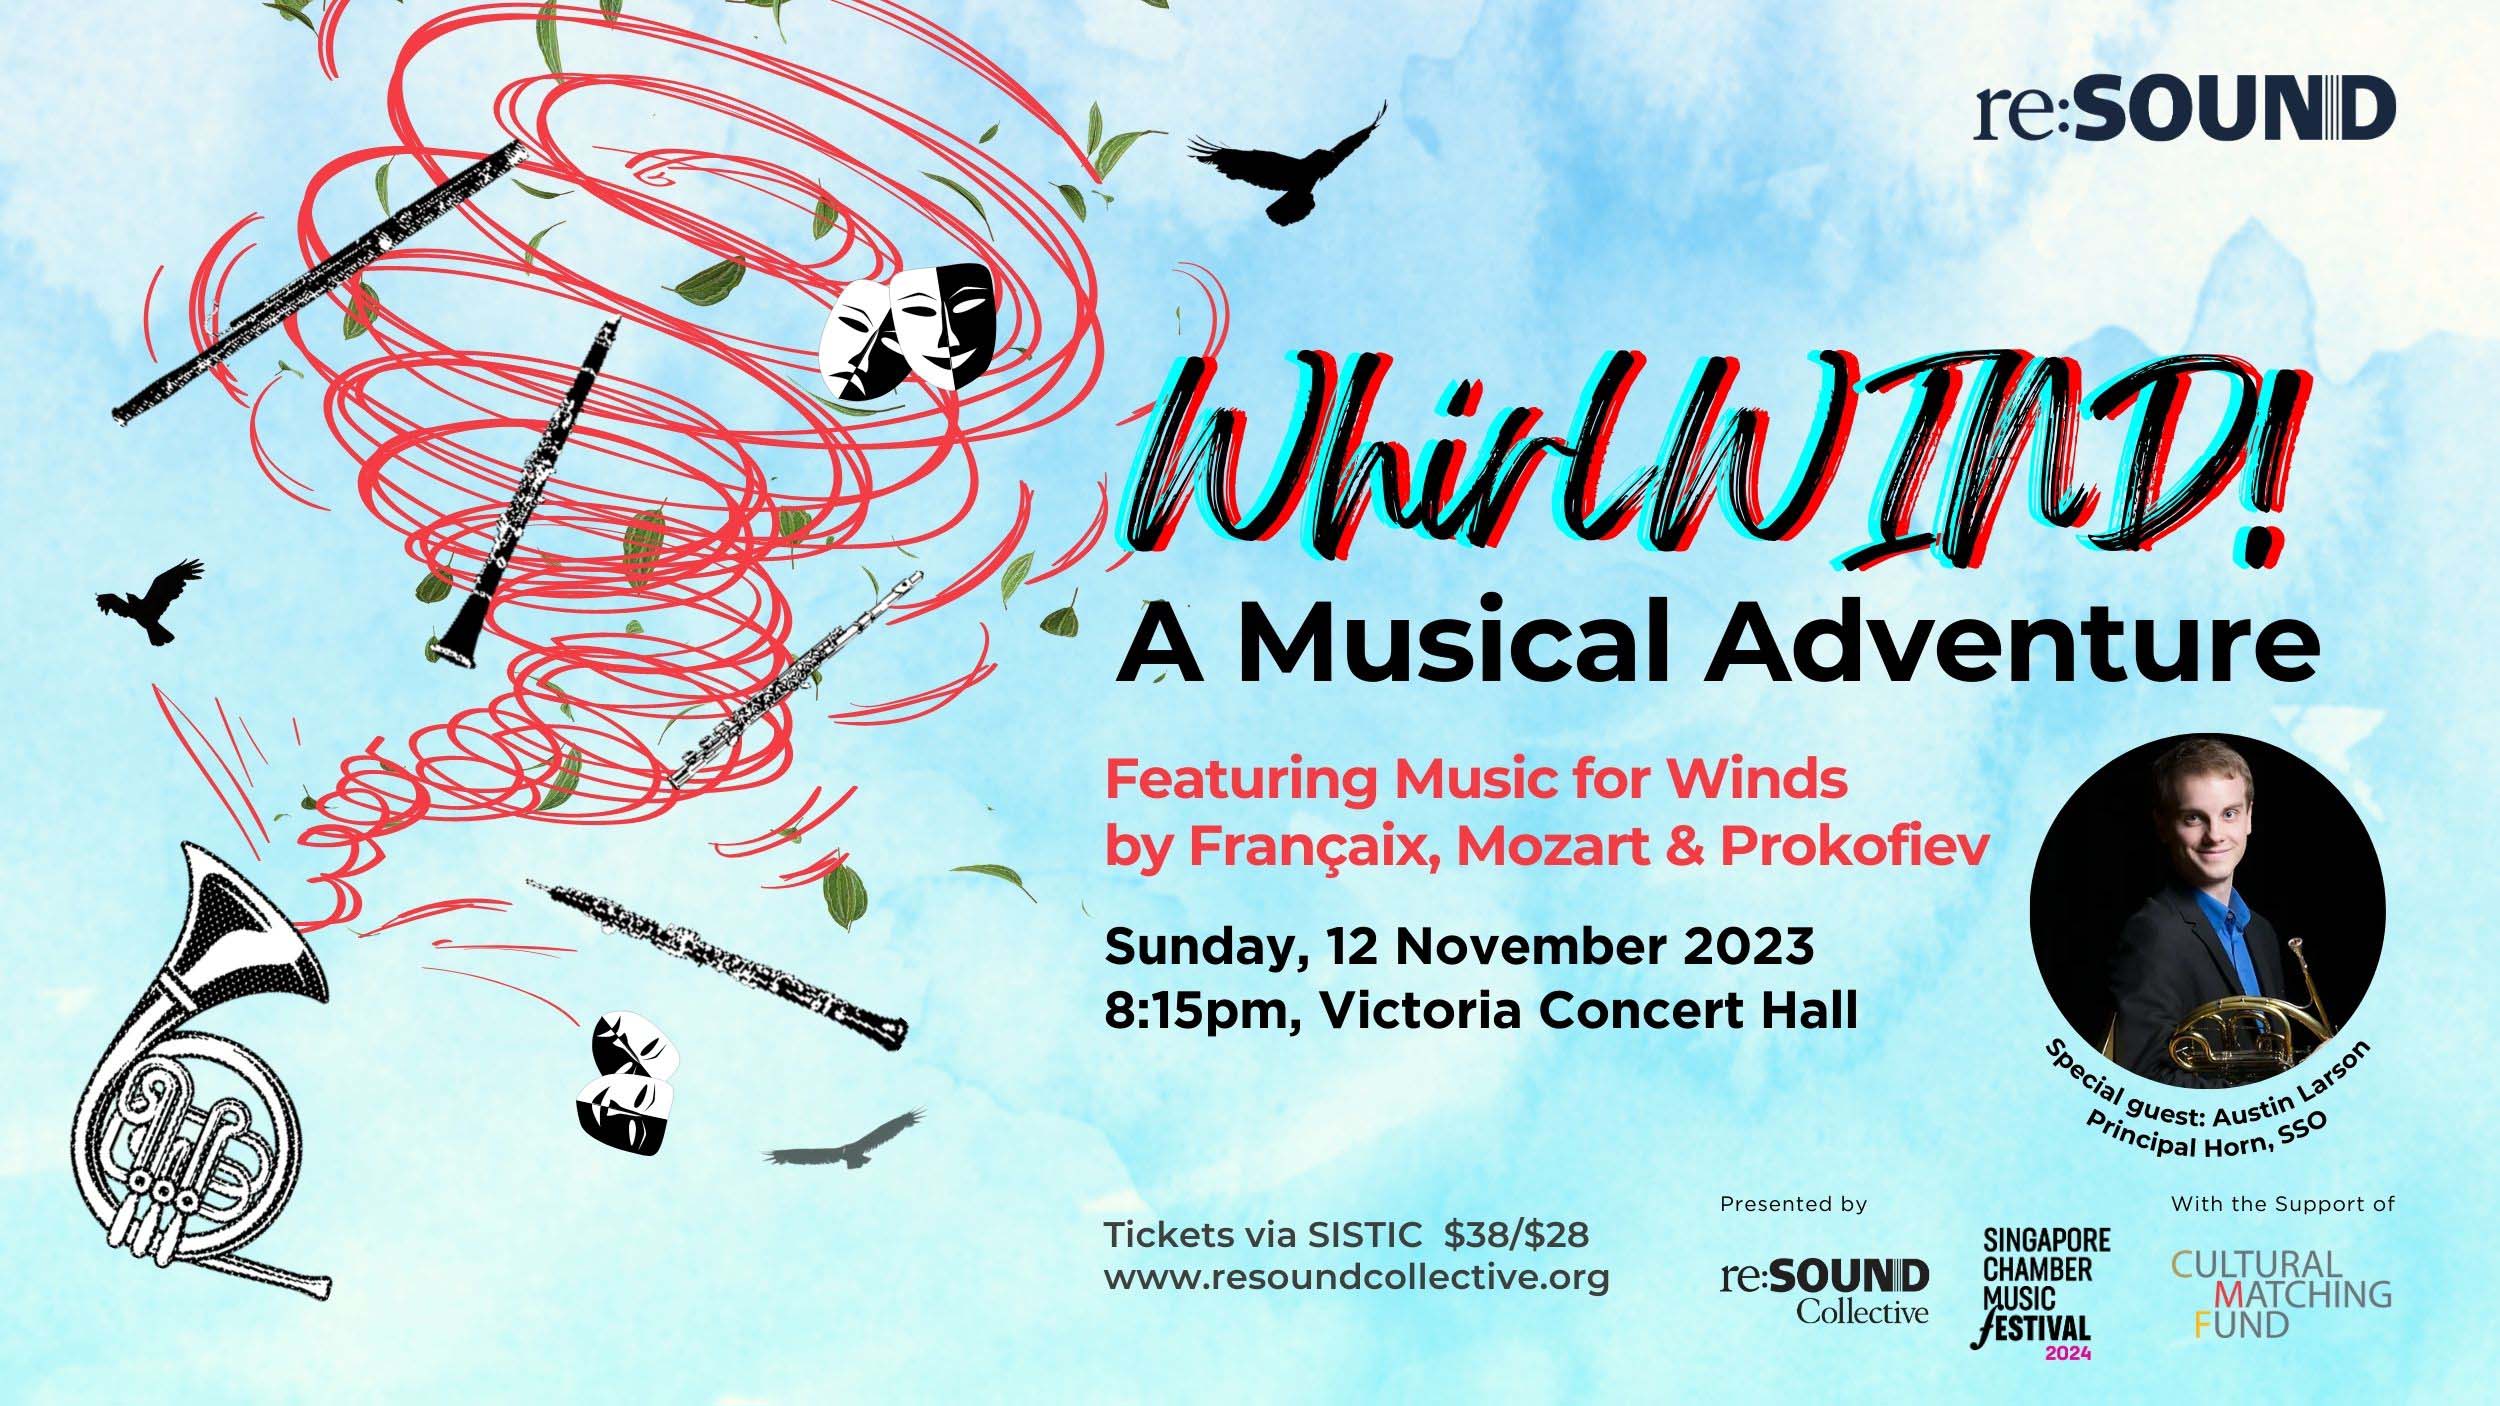 WhirlWIND! A musical adventure by re:Sound musicians featuring music for Winds by Francaix, Mozart & Prokofiev